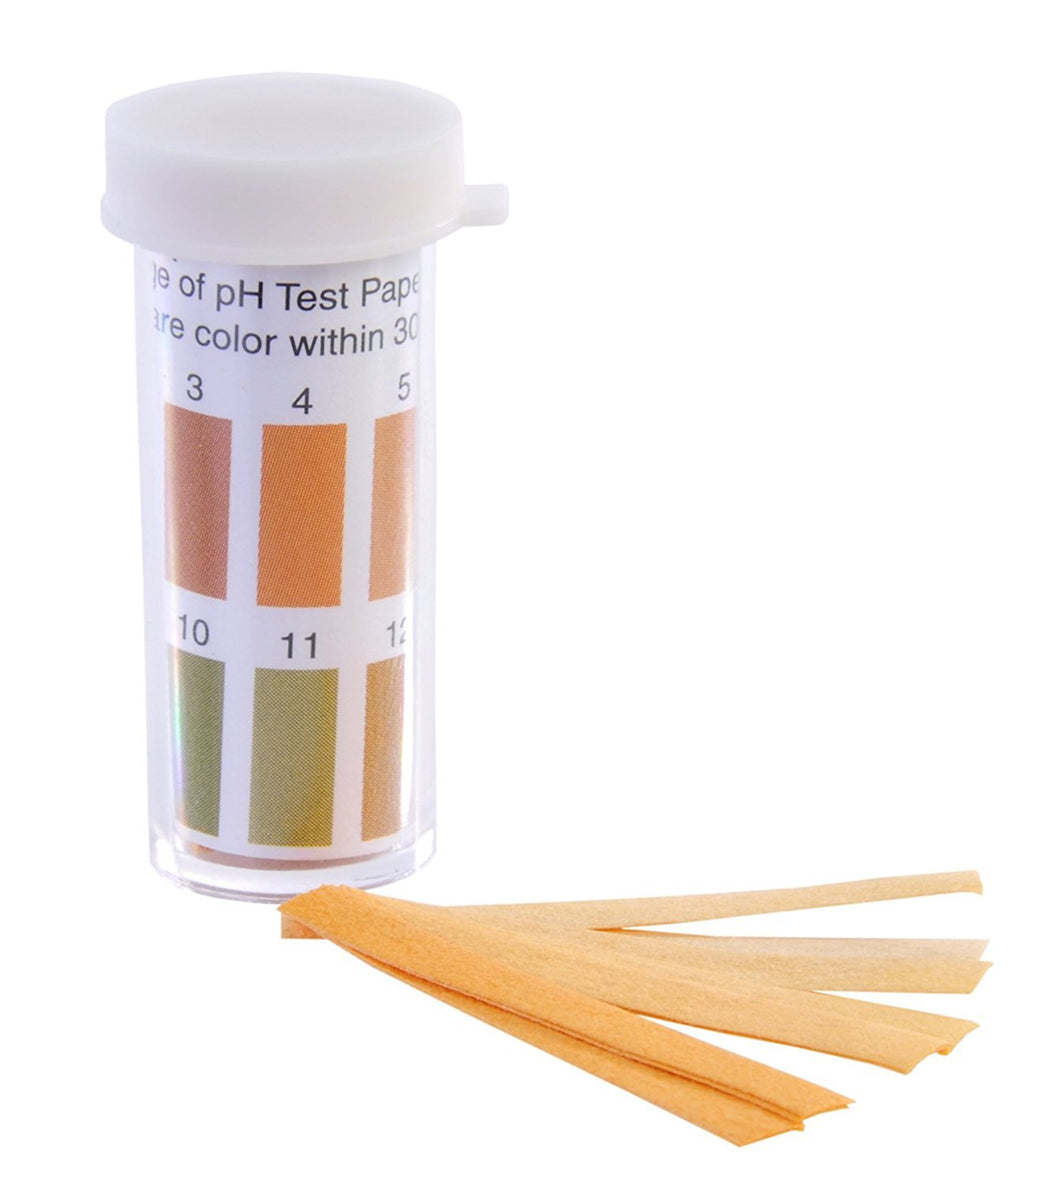 Pack of 100 Wide Range Test strips to measure pH | Includes a color indicator card for quick visual analysis of the sample | Measurement range in distinct divisions of 1 to 14 | Strips are 3 x 12mm each | All strips come in a plastic vial